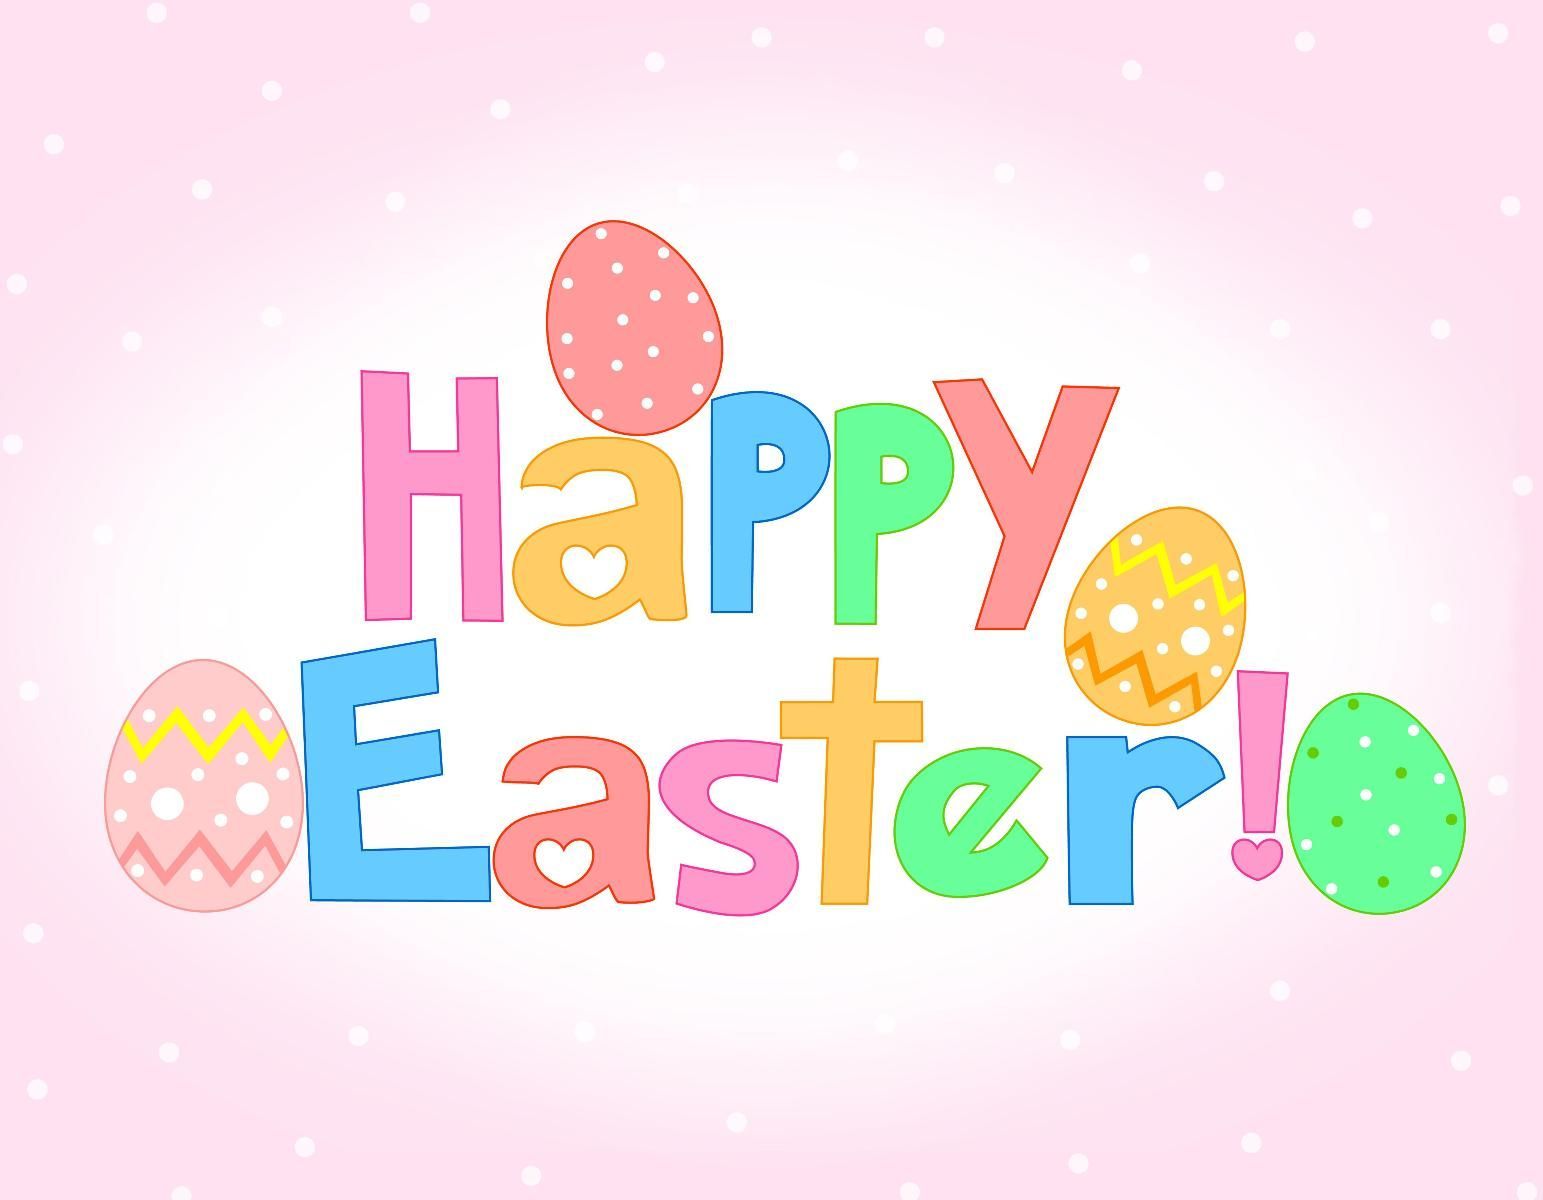 Easter 2019 Wallpapers